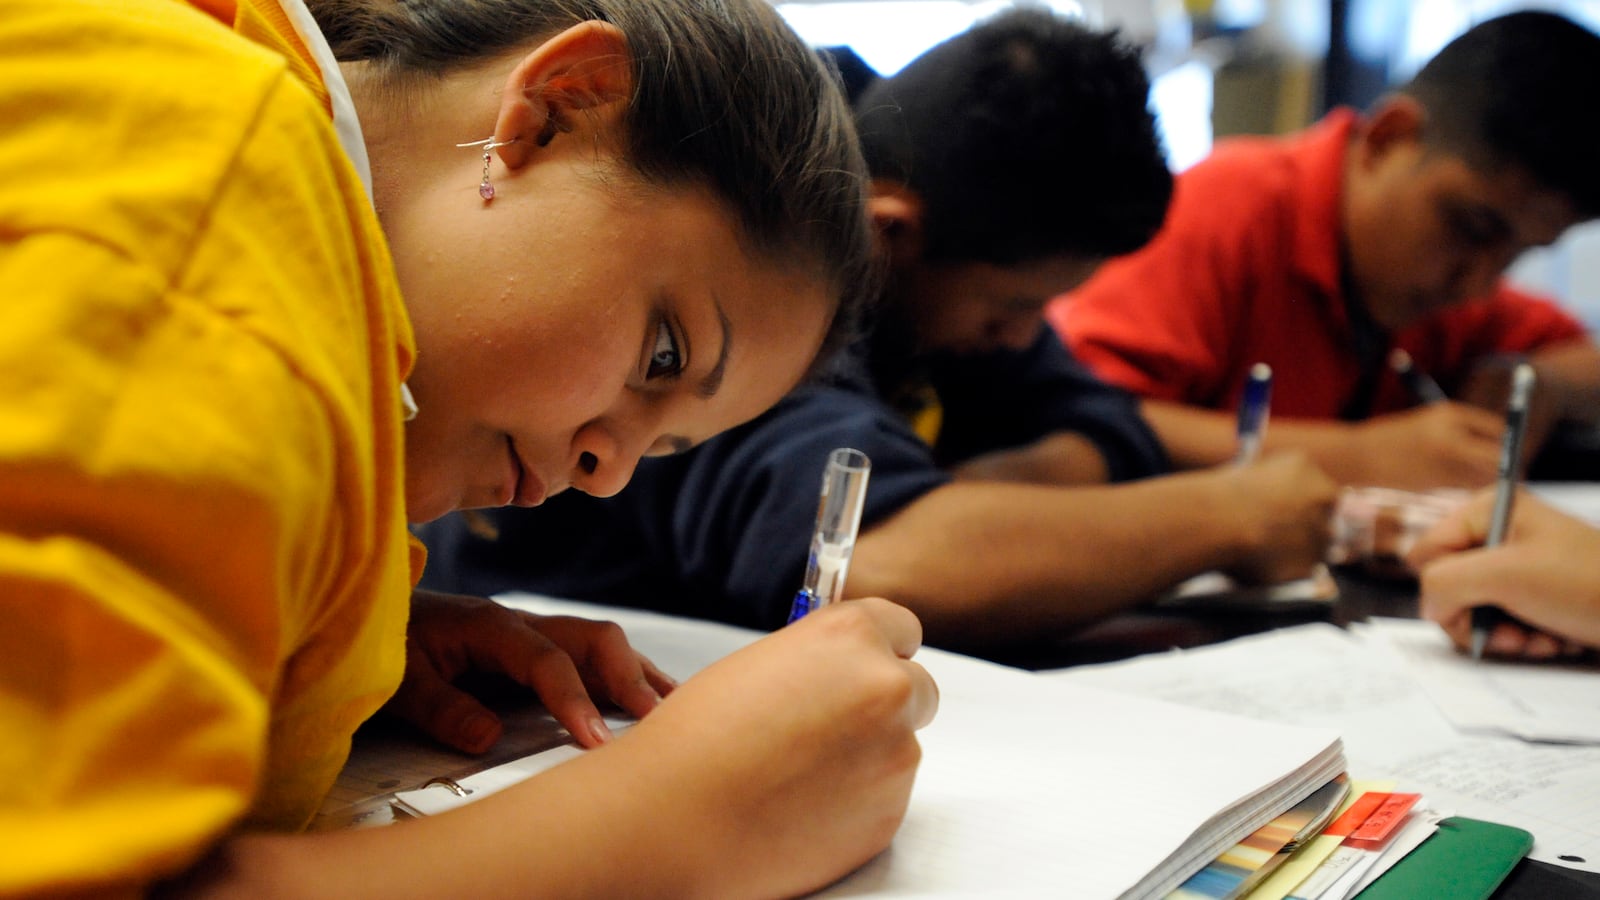 KIPP Sunshine Peak Academy students in a 2008 file photo. (Andy Cross/The Denver Post via Getty Images)